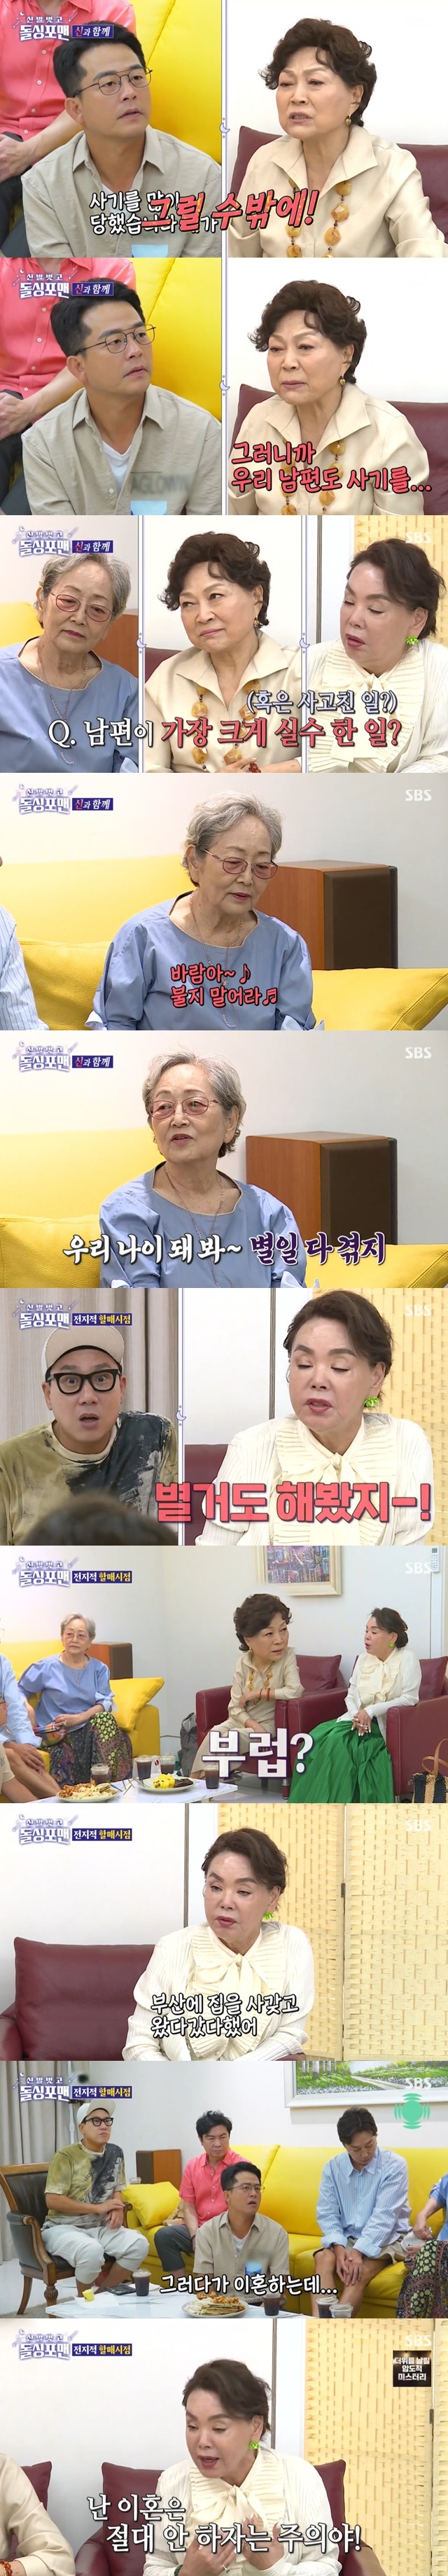 Kim Young-ok and Kim Soo-mi have heard Direct Forman as shock confessions.Kim Young-ok, Kim Yong-rim, and Kim Soo-mi appeared on SBS Take off your shoes and dolsing foreman broadcast on August 10.Kim Young-ok, Kim Yong-rim and Kim Soo-mi appeared on the show, and each of them was in the 62nd, 56th and 50th years of marriage, and surprised the stone singers Tak Jae-hun, Lim Won-hee, Lee Sang-min and Kim Jun-ho.Lee Sang-min asked a surprise question, Who do not want to look like my Husband among the four of us? And Tak Jae-hun received the most two votes.Kim Yong-rim only chose Kim Jun-ho.When Tak Jae-hun asked, Why did you marriage with someone like me? Kim Soo-mi said, I did not know. Husband does not think about tomorrow.You just have fun today, he said.Kim Young-ok said, What is similar is that there is no responsibility. I have a strong sense of responsibility, but I can not like to play like that.Kim Yong-rim said, I can not do evil to a good and innocent person. And foolish. That is a shame.You shouldnt live like that, Kim Jun-ho said, and admitted that Ive had a lot of Records of the Grand Historian.Kim Yong-rim also said, Our Husband has also been recorded as Records of the Grand Historian.When Lee Sang-min asked, Can you tell me one of the biggest mistakes and accidents that Husband made? Kim Jun-ho speculated, Is not it normal business? Kim Young-ok sang Do not blow Wind and Confessions Husbands Wind.Kim Young-ok lamented, But I live with it all.When Lee Sang-min asked if he had ever considered divorce, Kim Young-ok said, I had a lot of times when I wanted to do it five thousand times. Kim Soo-mi said, I have lived enough to know how I feel about a divorced person.Kim Soo-mi said he had tried to separate from him, saying, I bought a house in Busan and went back and forth.When Kim Jun-ho was worried that he was divorcing, Kim Soo-mi replied, Im not going to divorce, but I did it because I didnt want to come home.Kim Young-ok said, You have done everything you have to do. I went out to One Week.I have the youngest in my brothers house. He envied Kim Soo-mi, saying that he had only tried to run away from One Week.